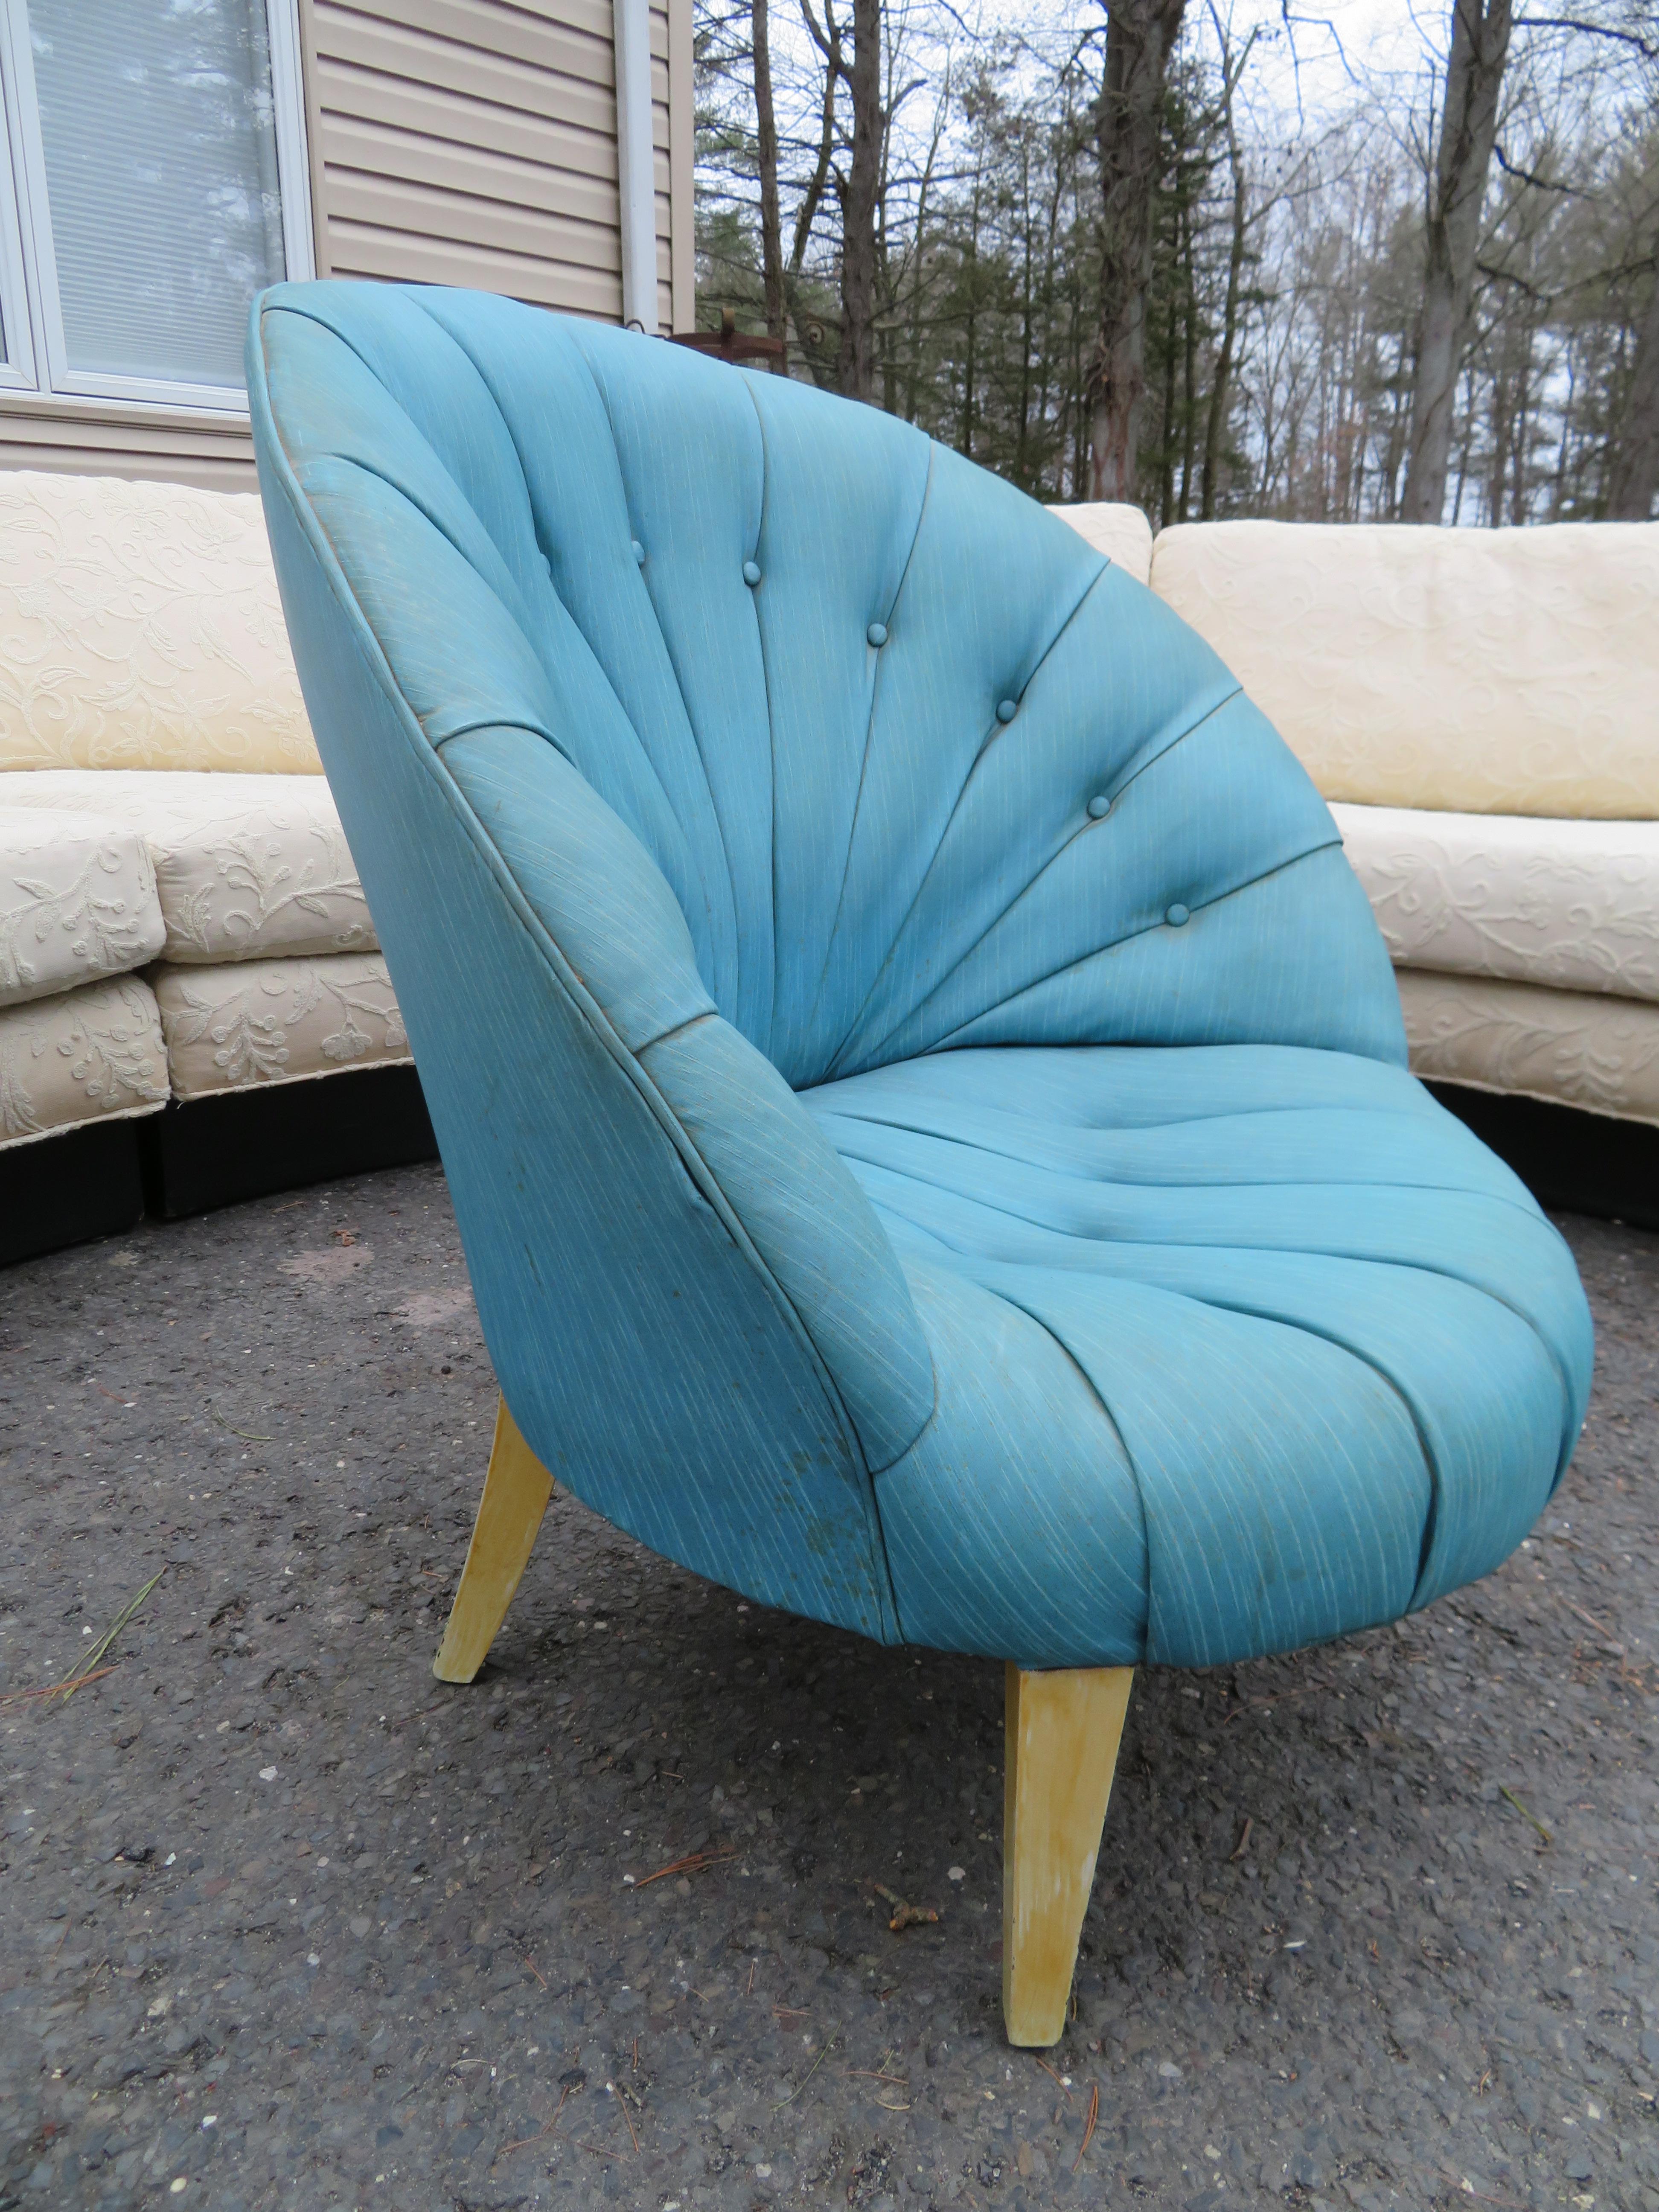 Delightful Dorothy Draper style channel-tufted circular chair. This chair will need to be re-upholstered as the original fabric is worn and dated. It measures 31.5